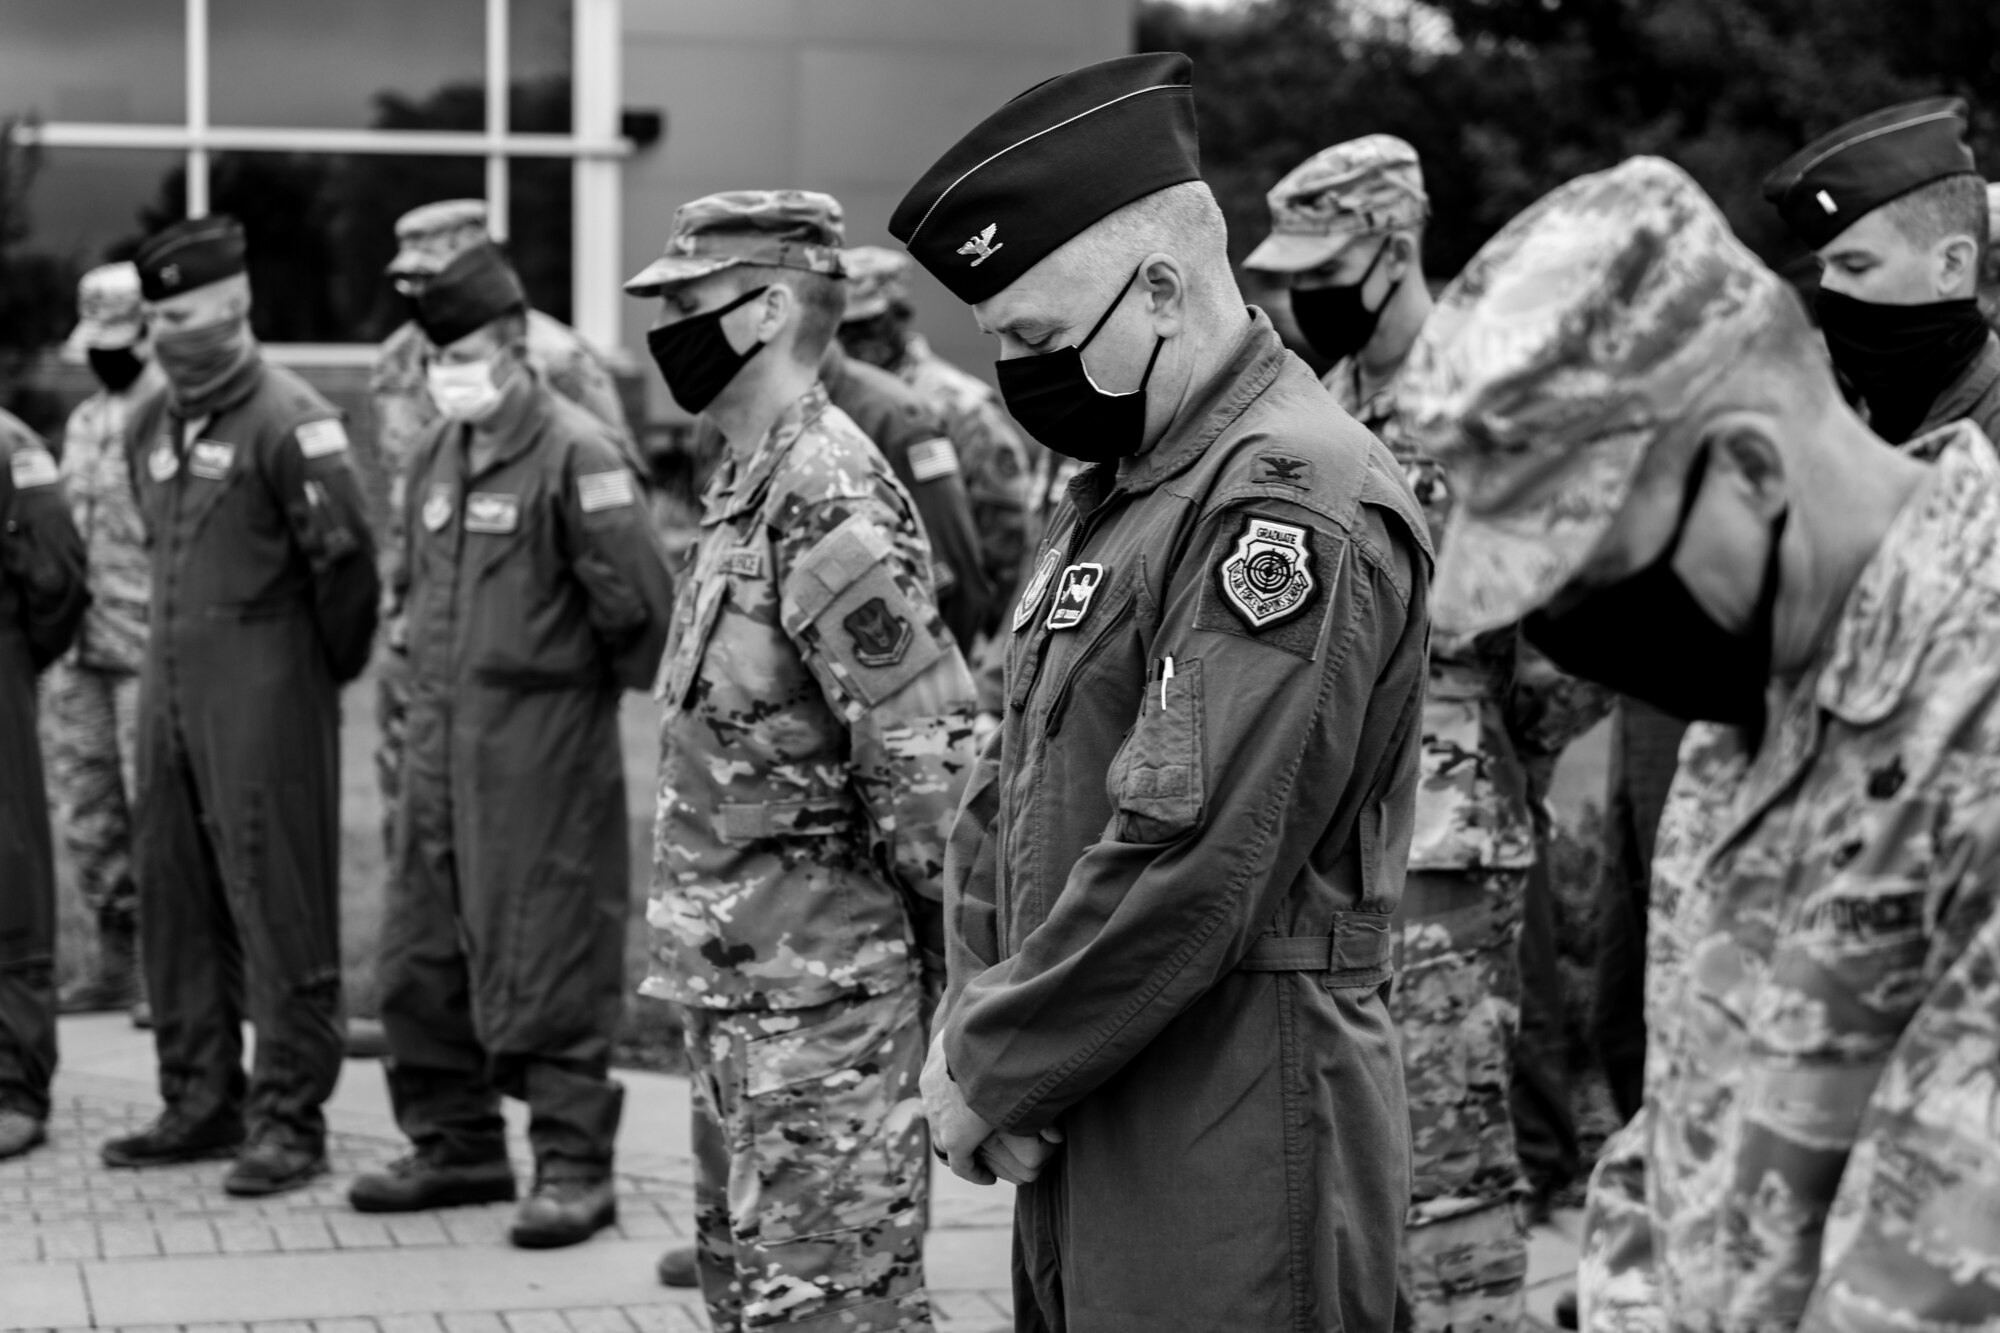 910th Airlift Wing members bow their heads, Sept. 11, 2020, during the invocation at Youngstown Air Reserve Station’s 9/11 remembrance ceremony. The installation has held a ceremony every year to honor those who lost their lives on Sept. 11, 2001.